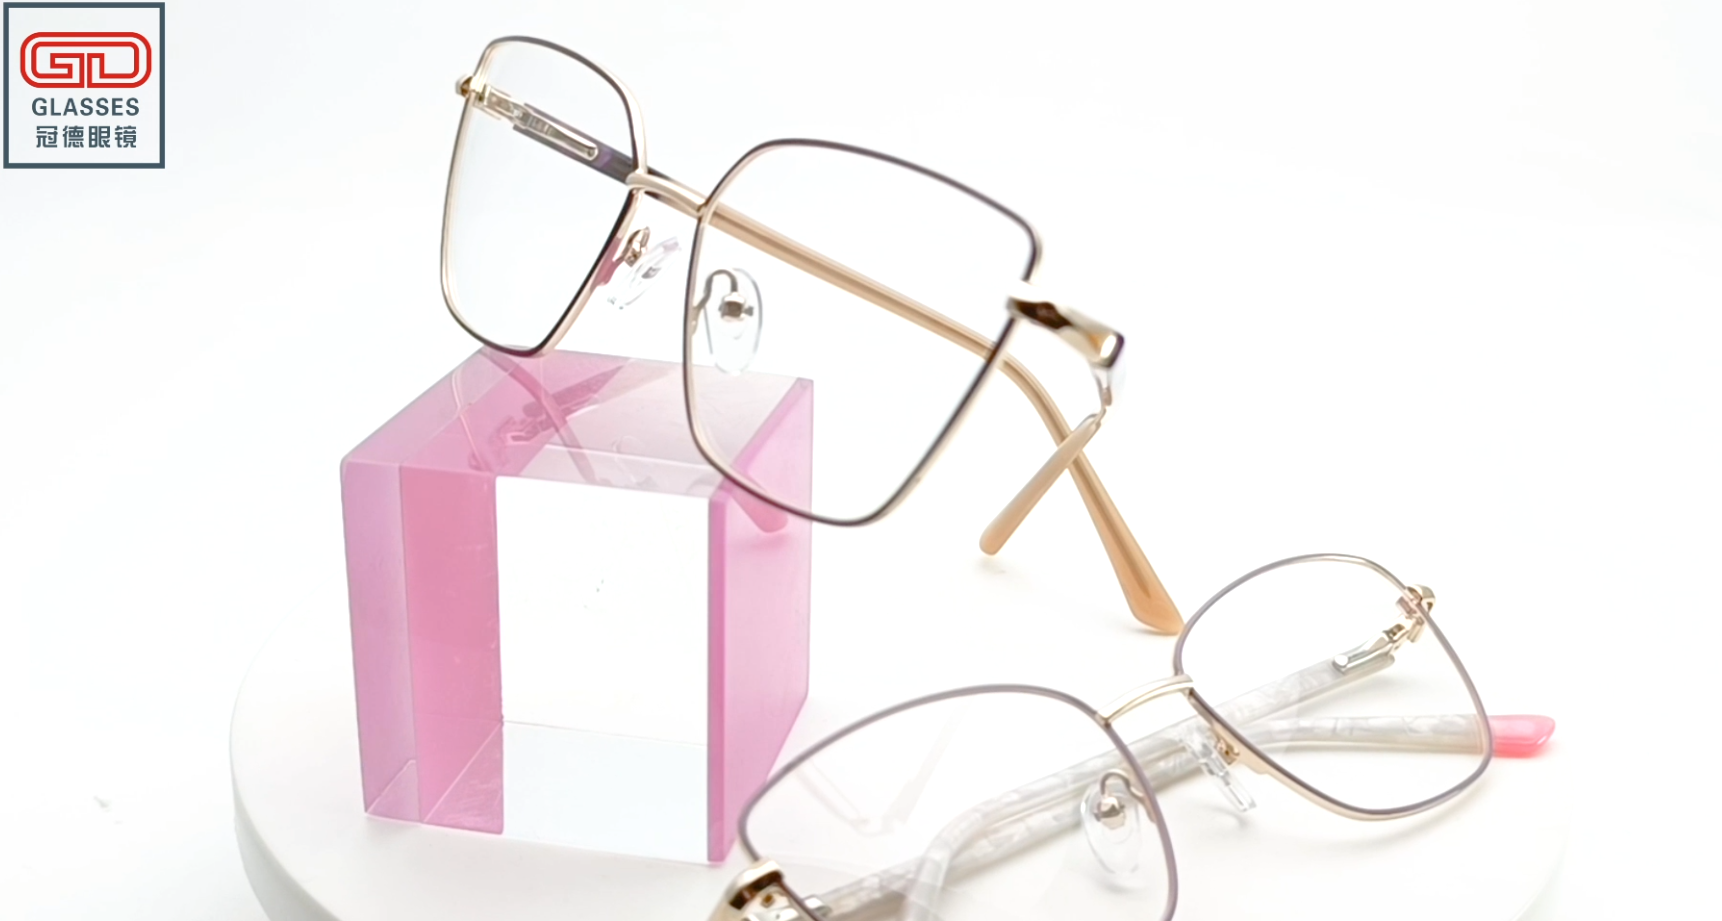 The Benefits of Wearing Glasses for Myopia and Eye Care